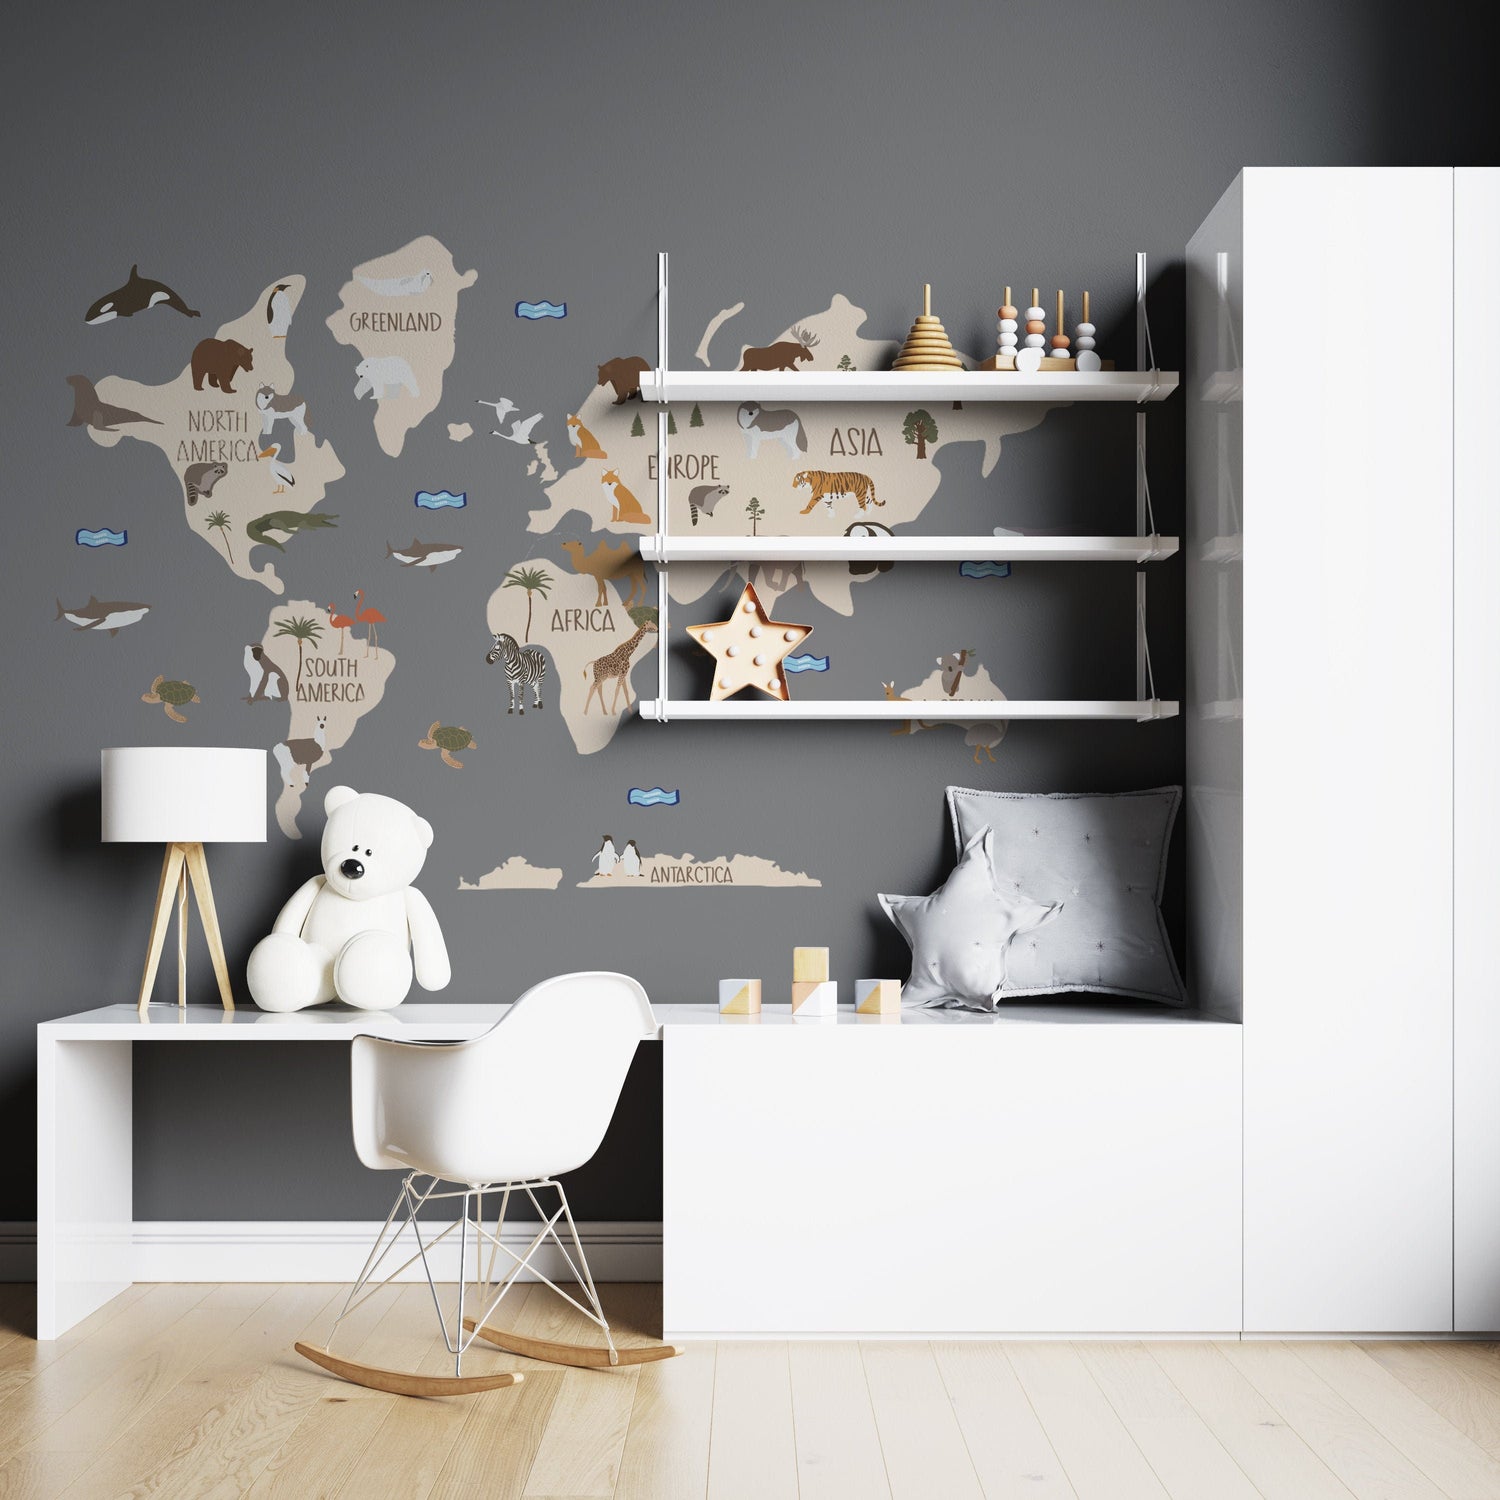 Build Your Own World Map Wall Sticker XL